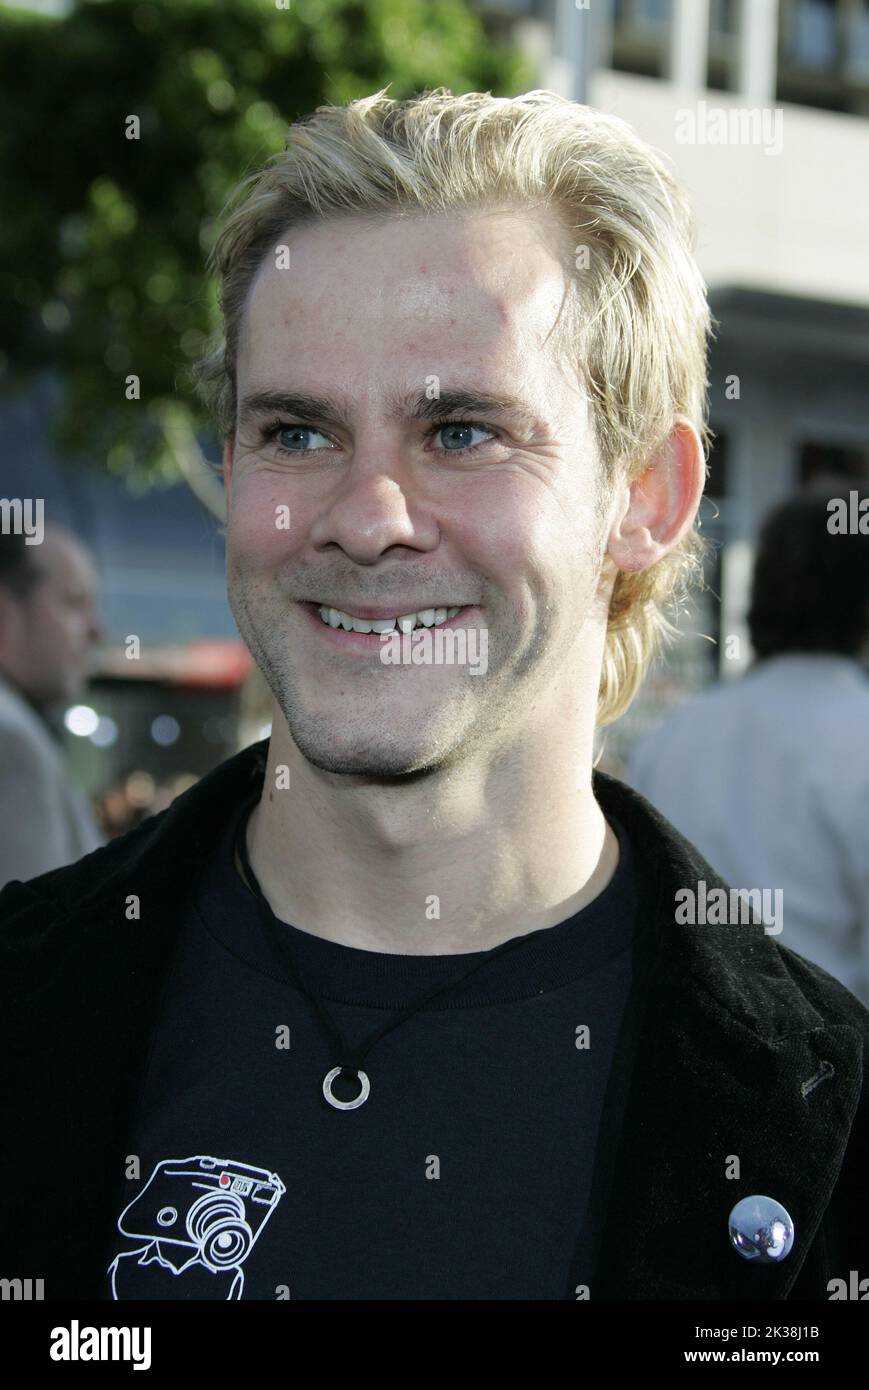 DOMINIC MONAGHAN ACTOR BATMAN BEGINS CHINESE THEATRE, HOLLYWOOD LOS ANGELES, USA 06/06/2005 LAM51579 Stock Photo